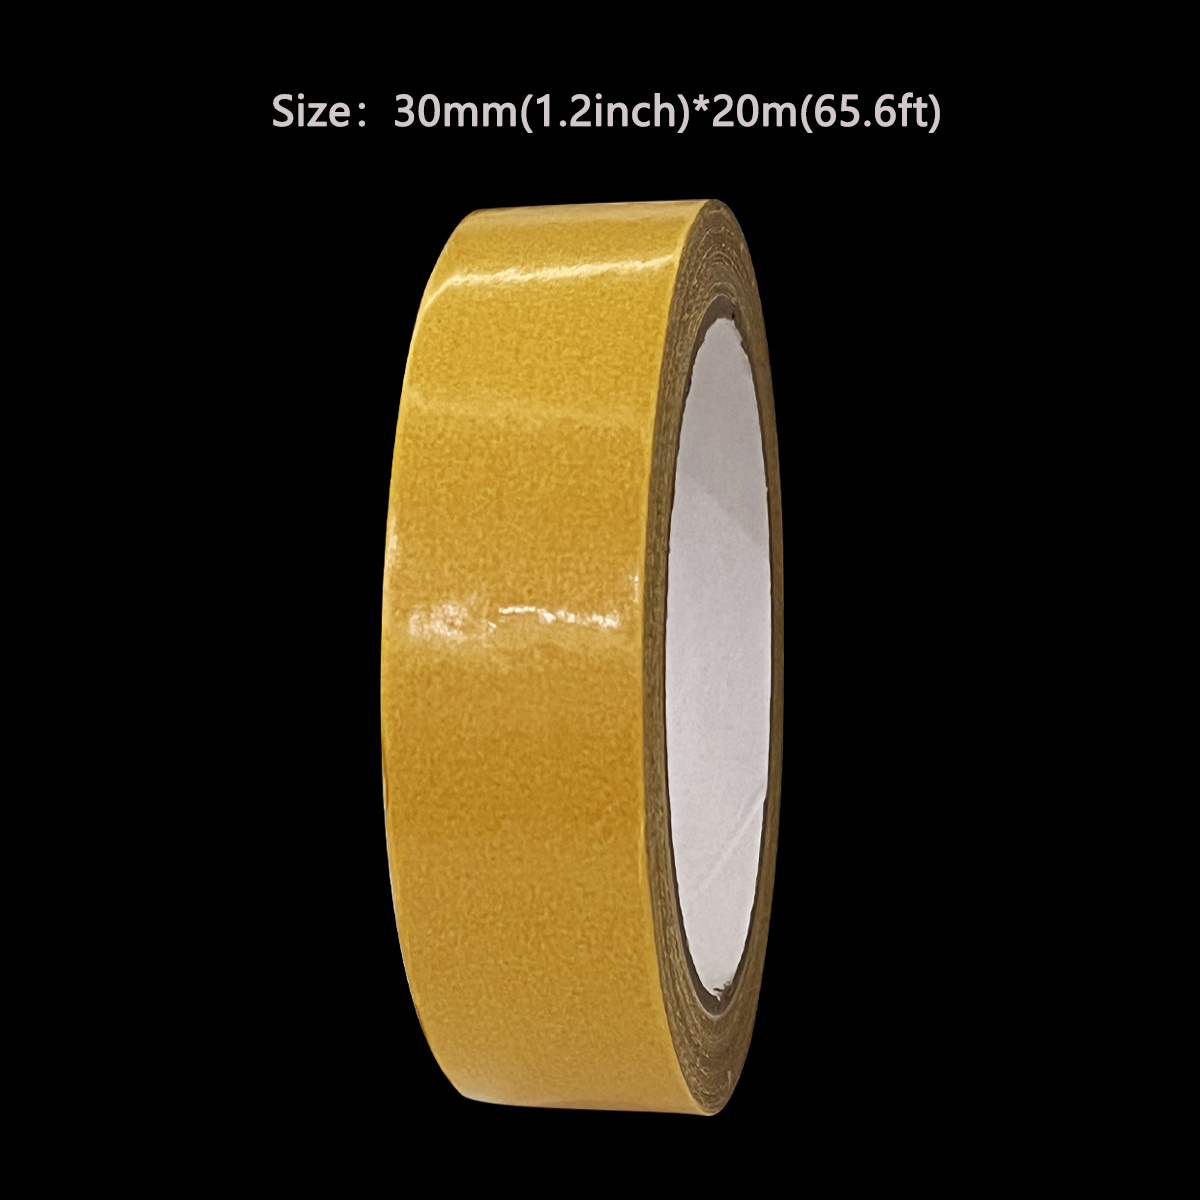 Double Sided Tape Heavy Duty universal High Tack Strong Wall - Temu Belgium